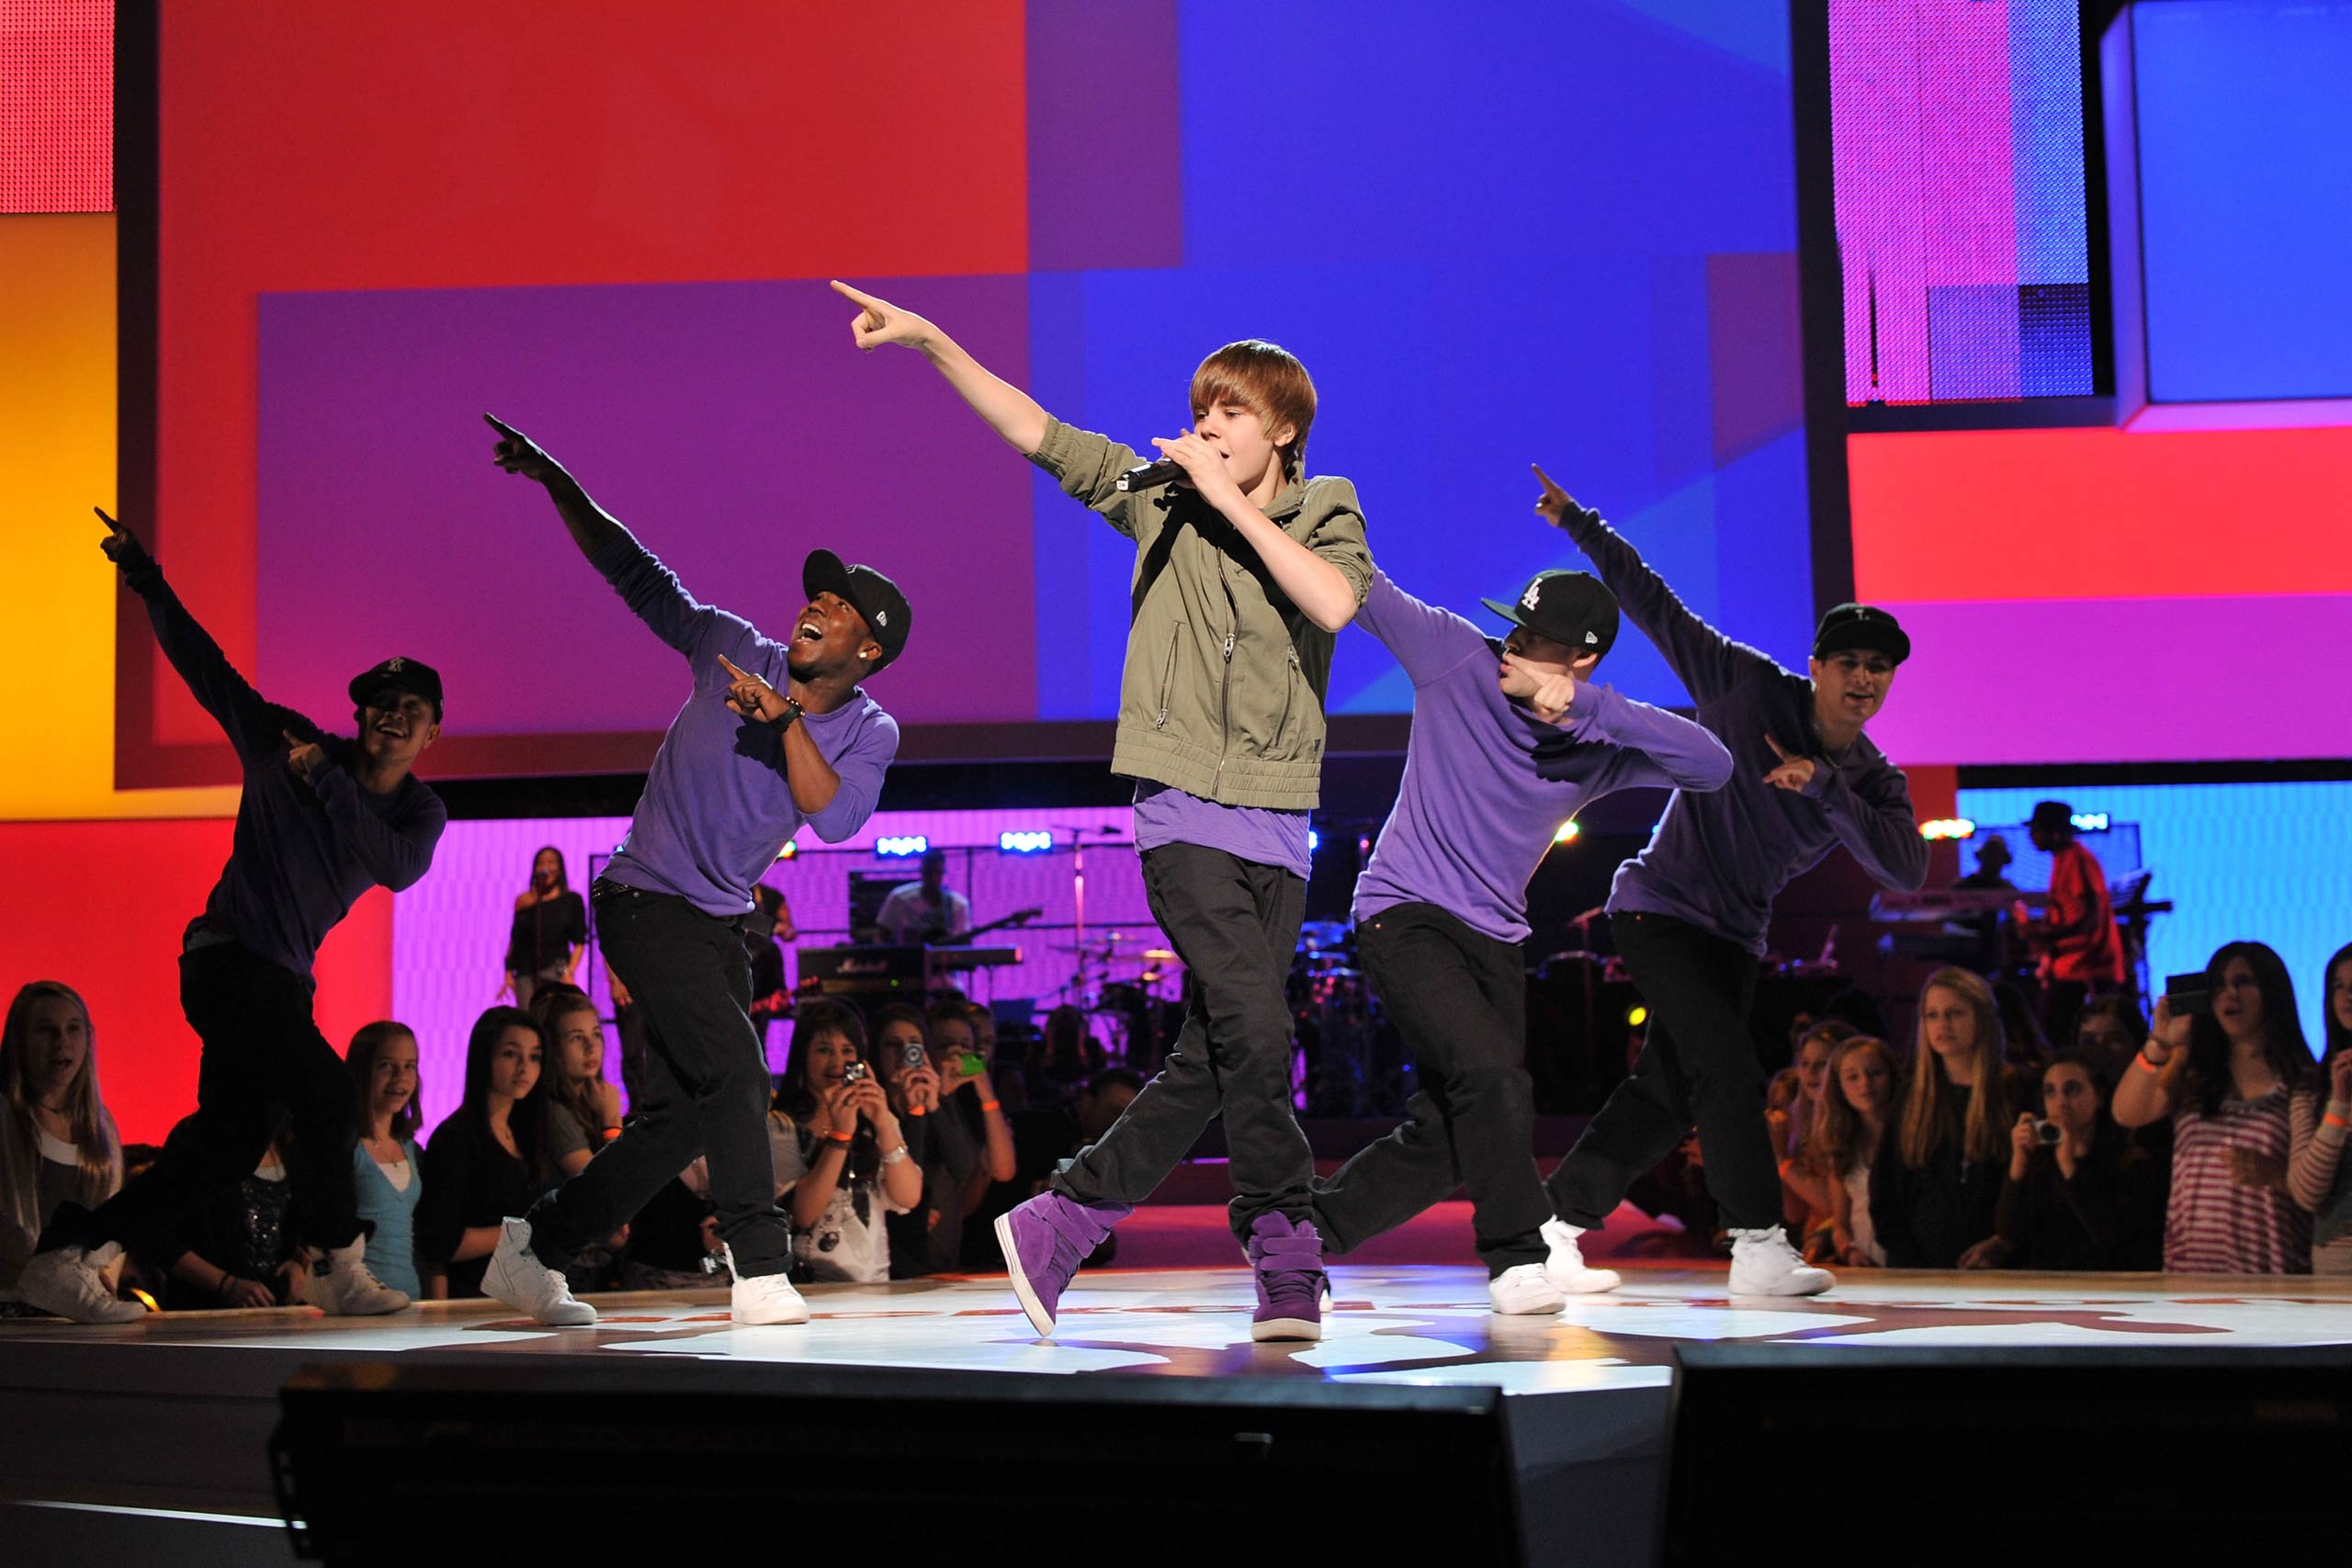 Justin Bieber performs onstage at the 2010 Nickelodeon Upfront Presentation at Hammerstein Ballroom in New York City. in 2010.